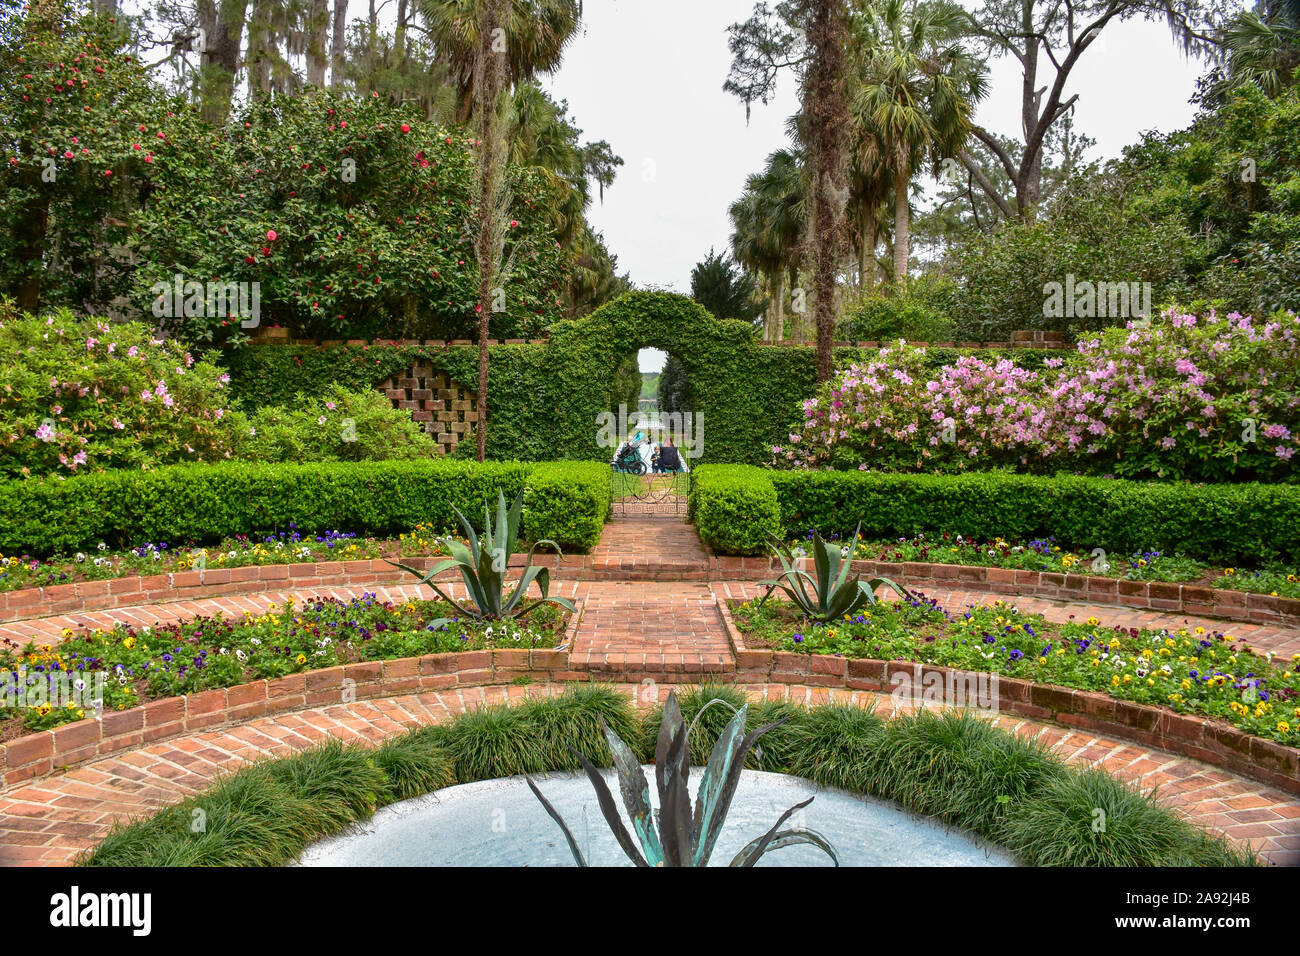 TALLAHASSEE, FLORIDA, USA - MARCH 29, 2016  The secret garden at Killearn Plantation, in the Alfred B. Maclay State Park is beautiful designed. Stock Photo